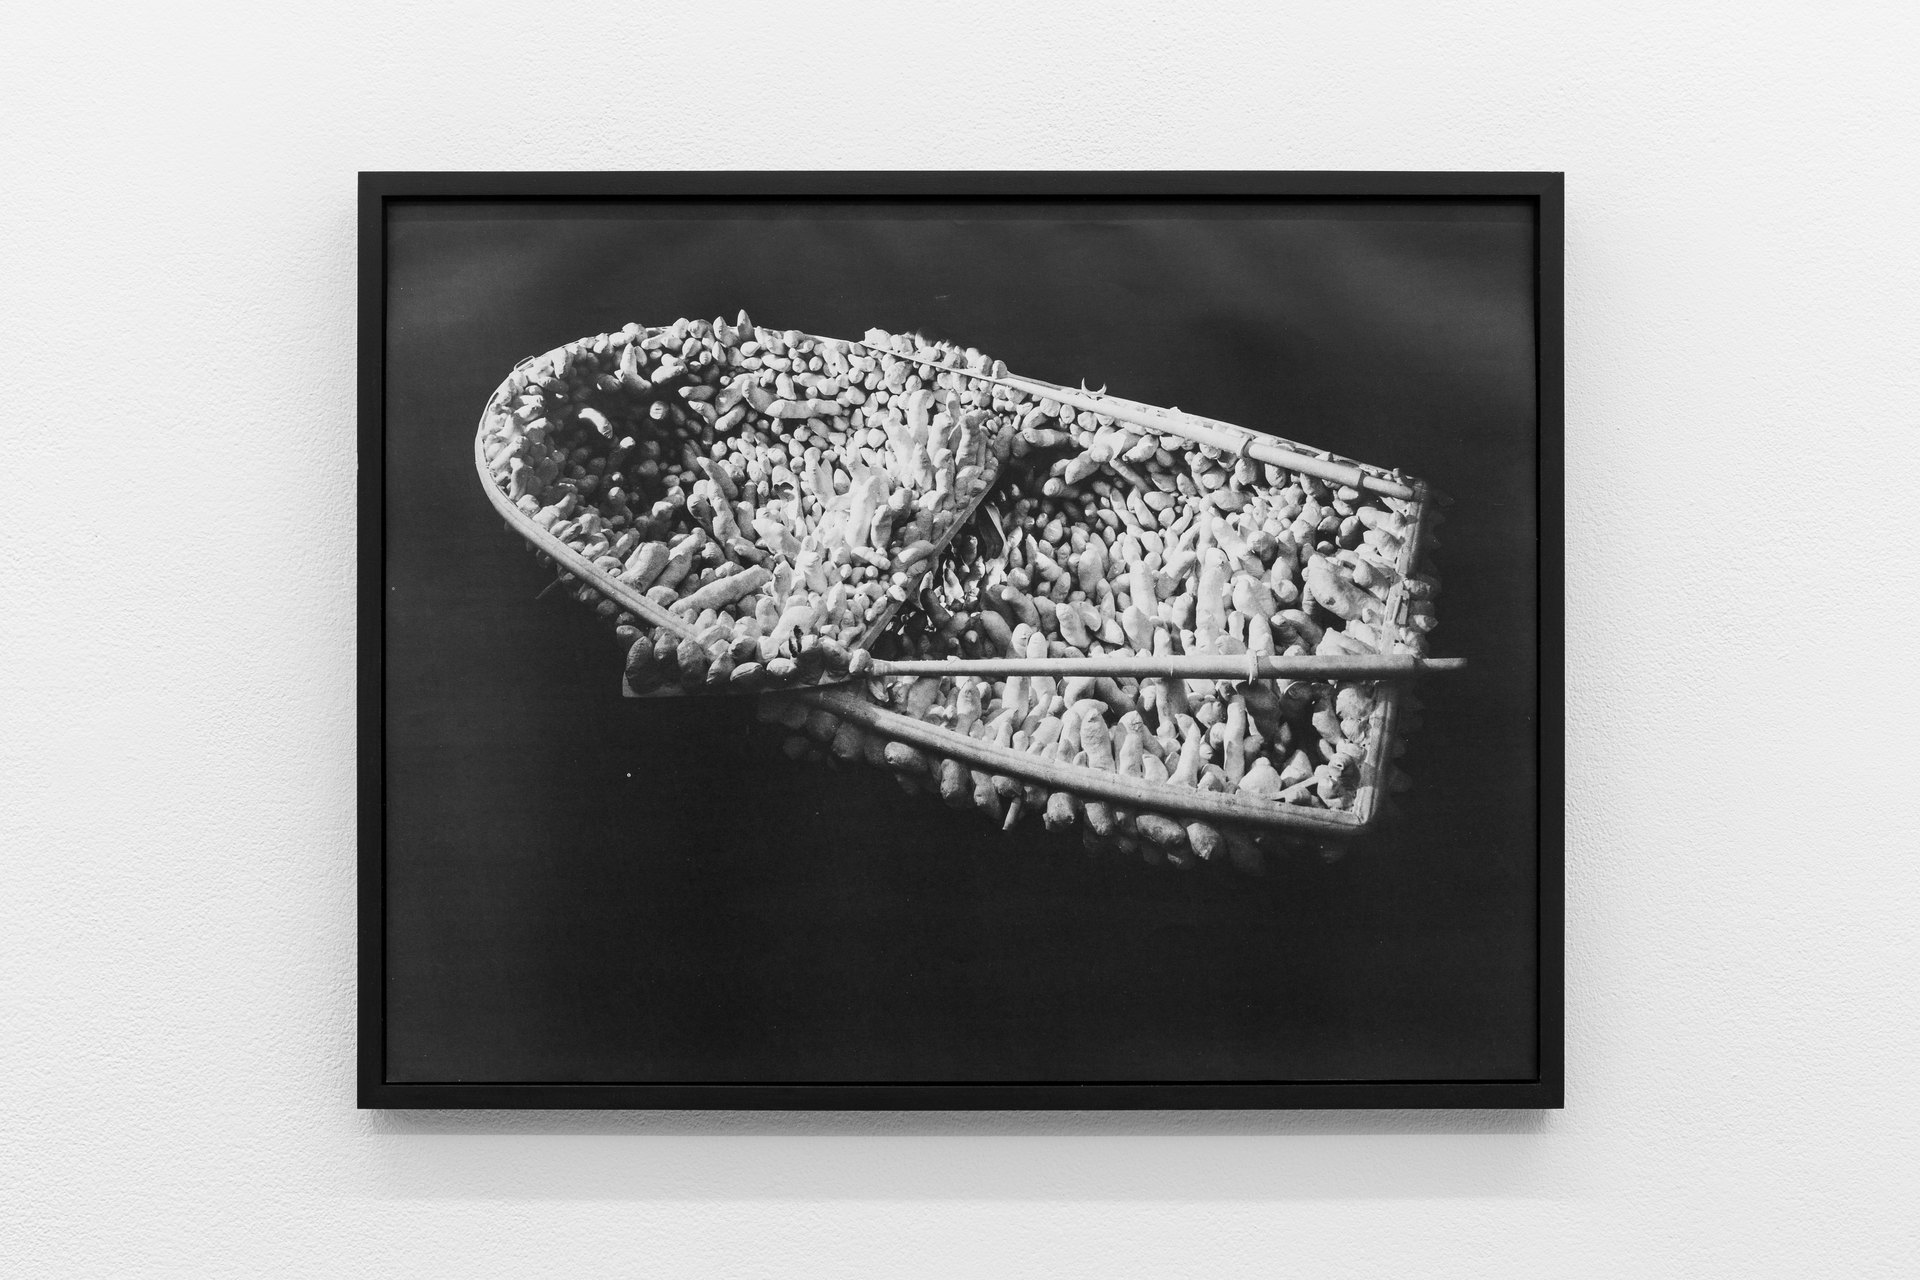 Yayoi Kusama, 'Aggregation Boat Show', c. 1962, Framed print, 43.2 x 56.4cm, Shit and Doom - NO!art, 2019, Cell Project Space